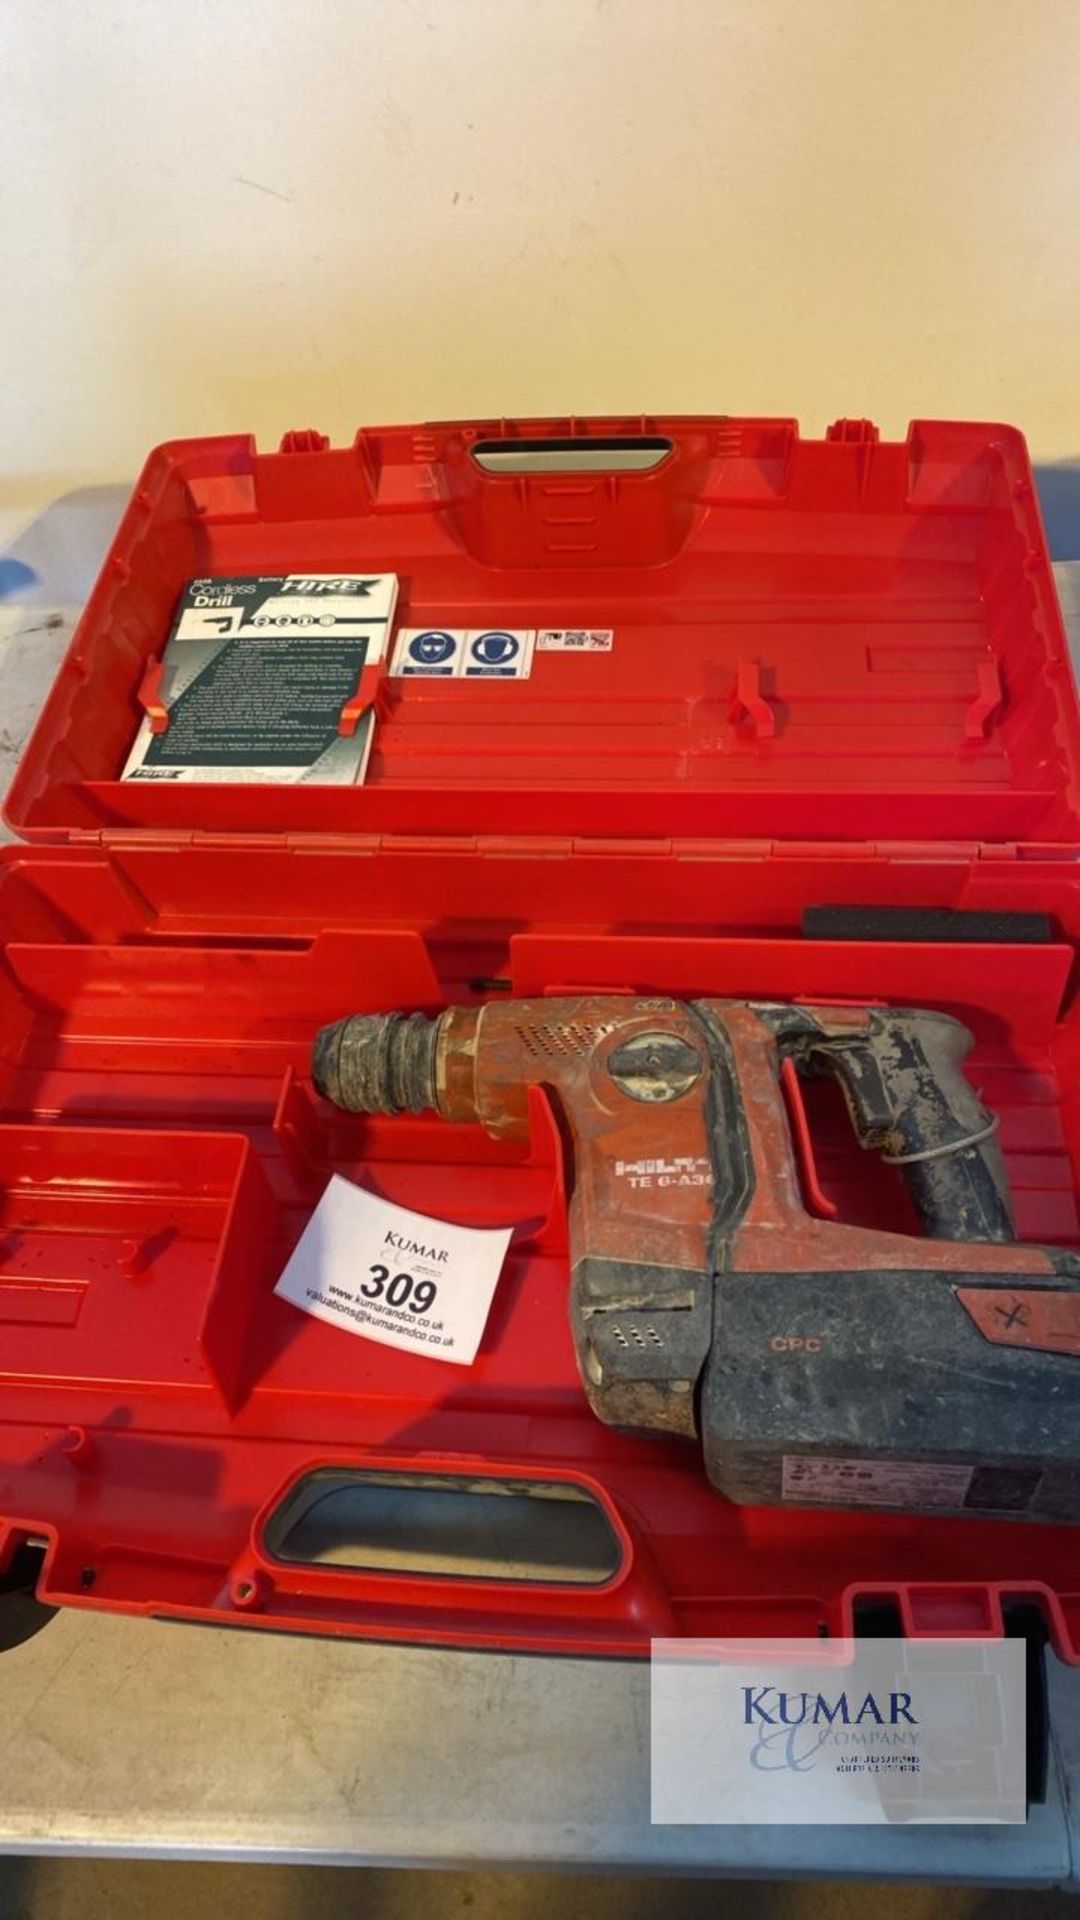 Hilti TE 6-A36 36V SDS Cordless Hammer Drill with Battery & Carry Case, Serial No. 908700333 ( - Image 4 of 4